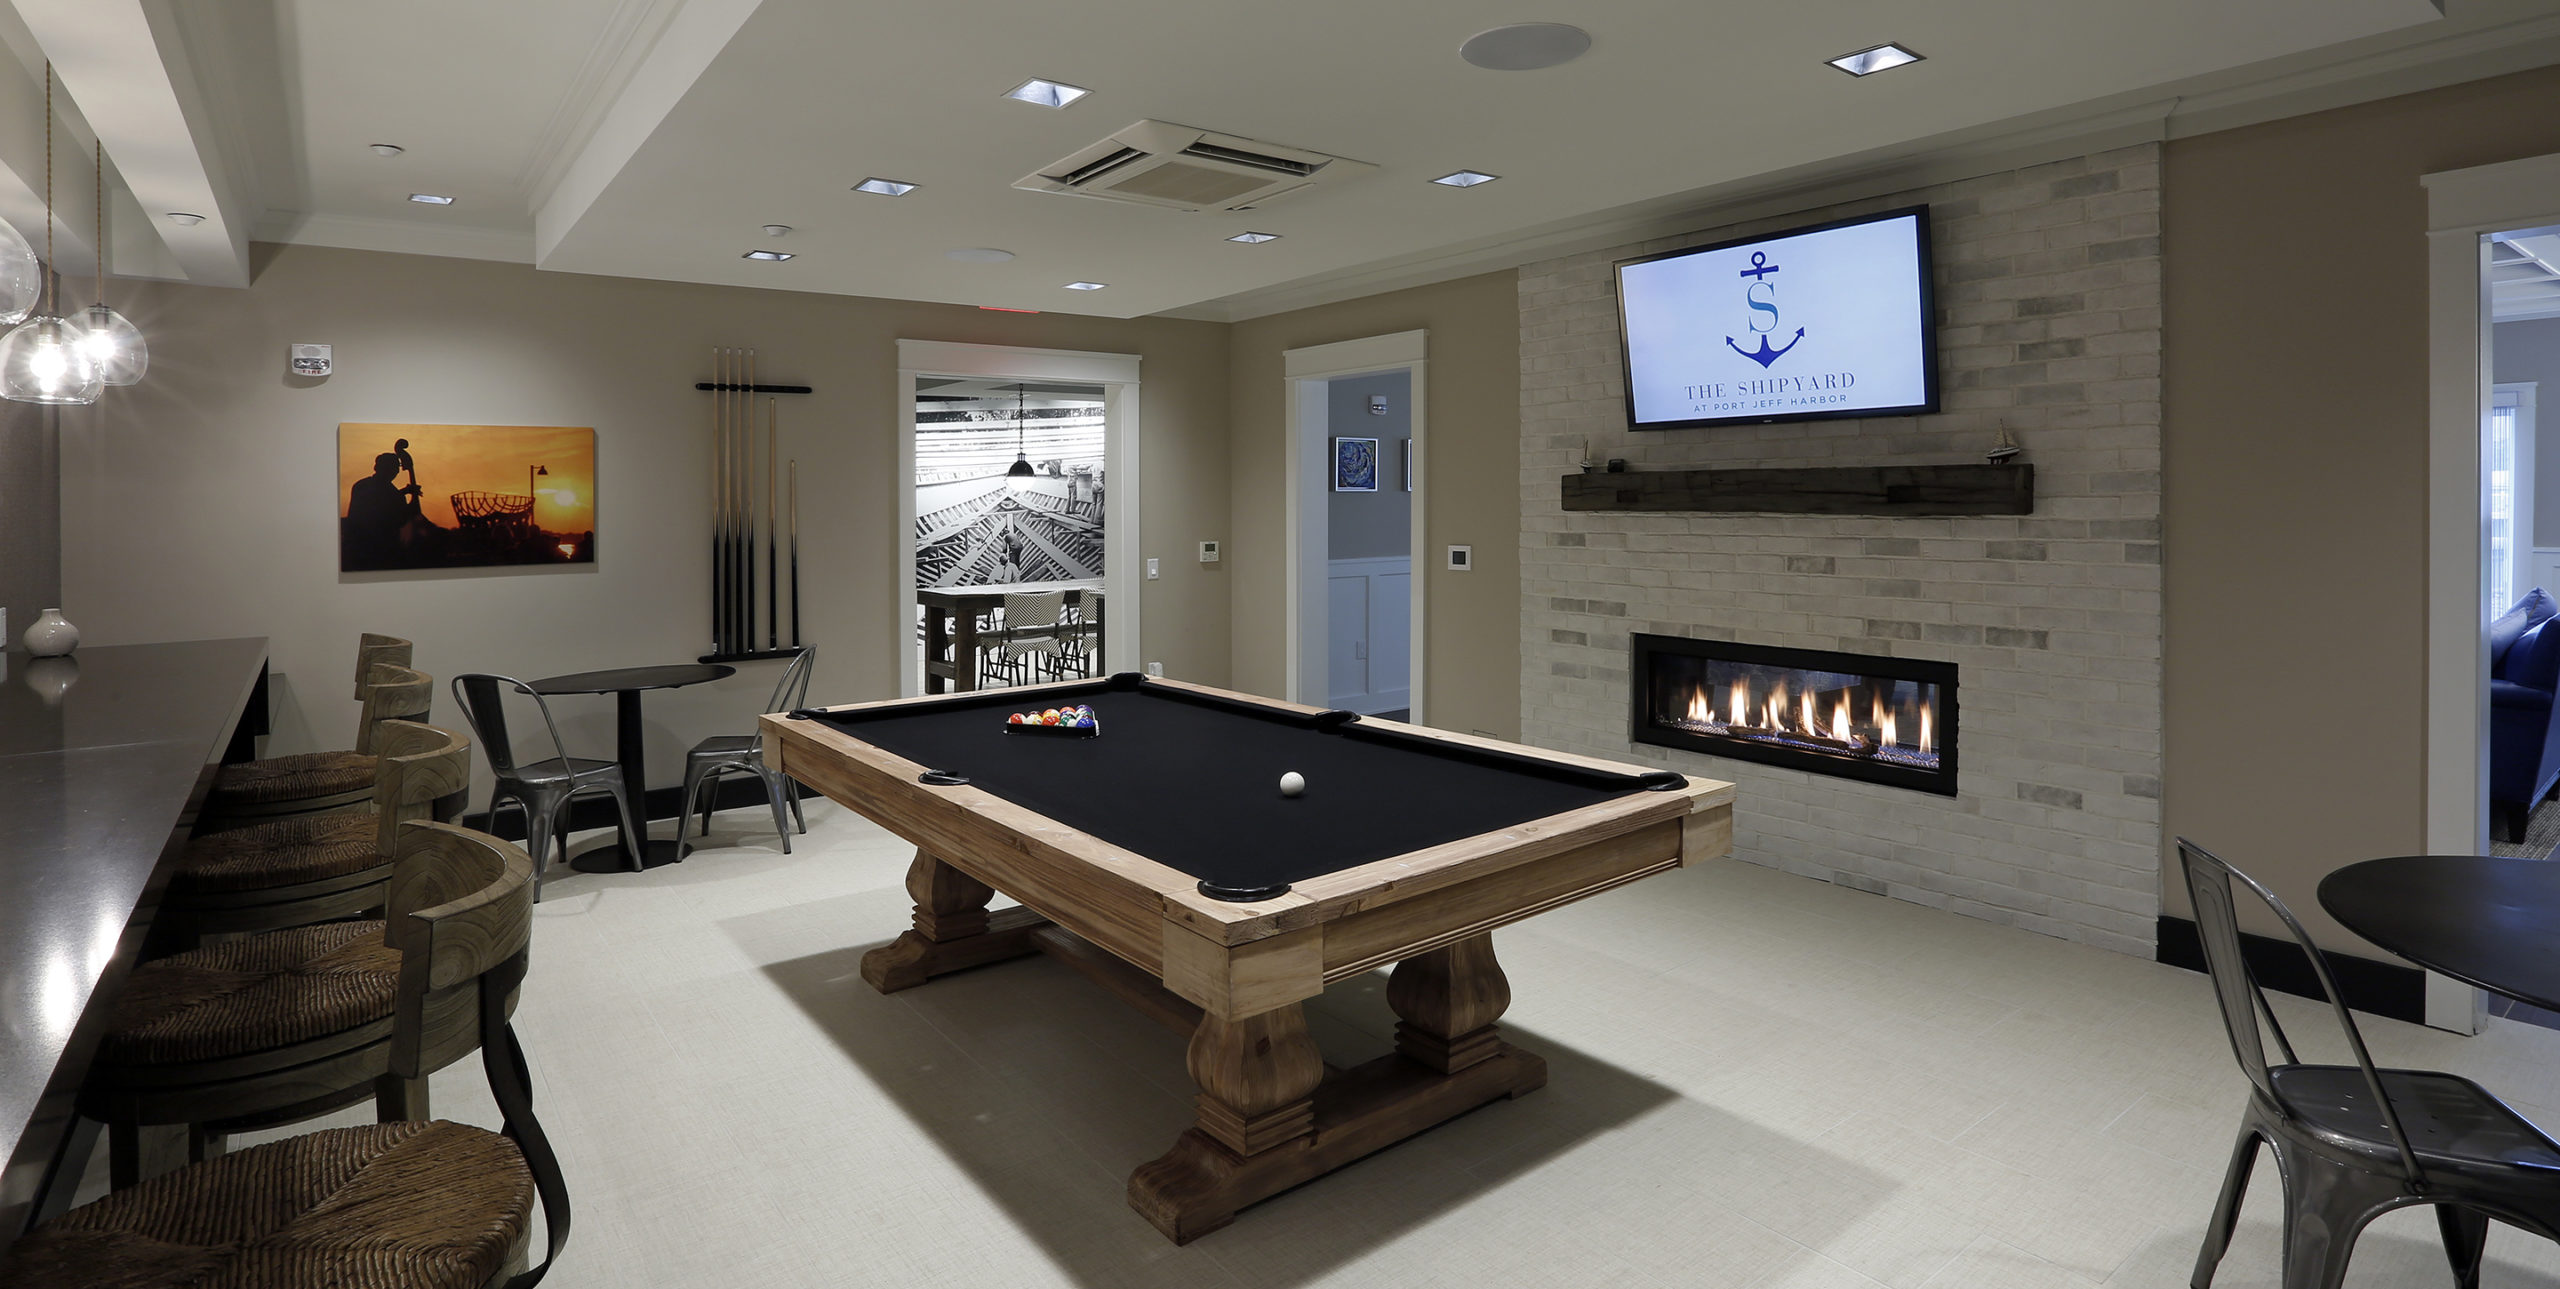 Pool table in a recreational room at The Shipyard at Port Jeff Harbor